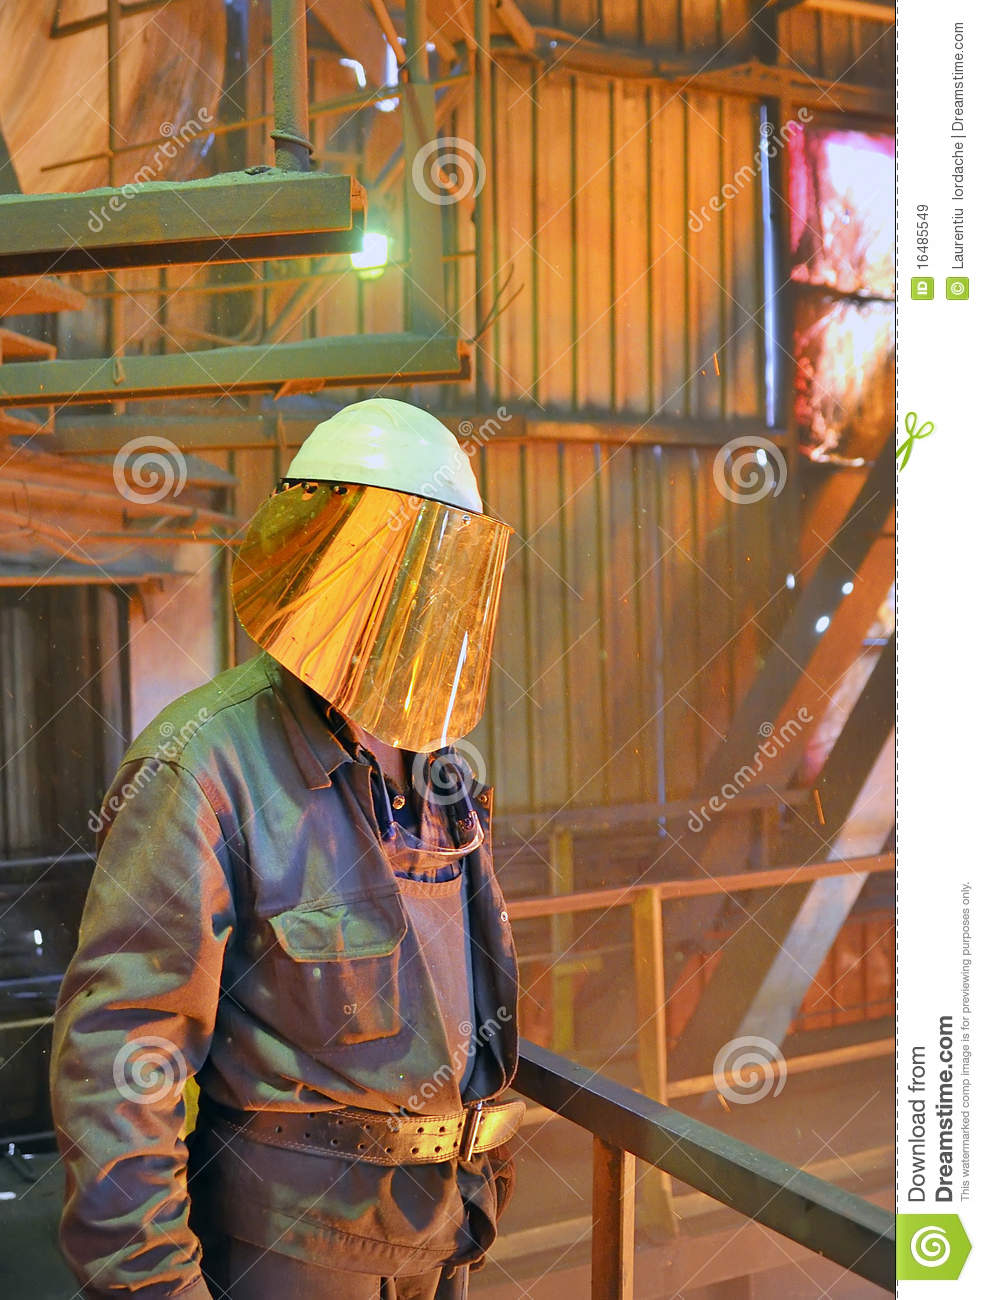 Mill Worker With Hot Steel Royalty Free Stock Images   Image  16485549